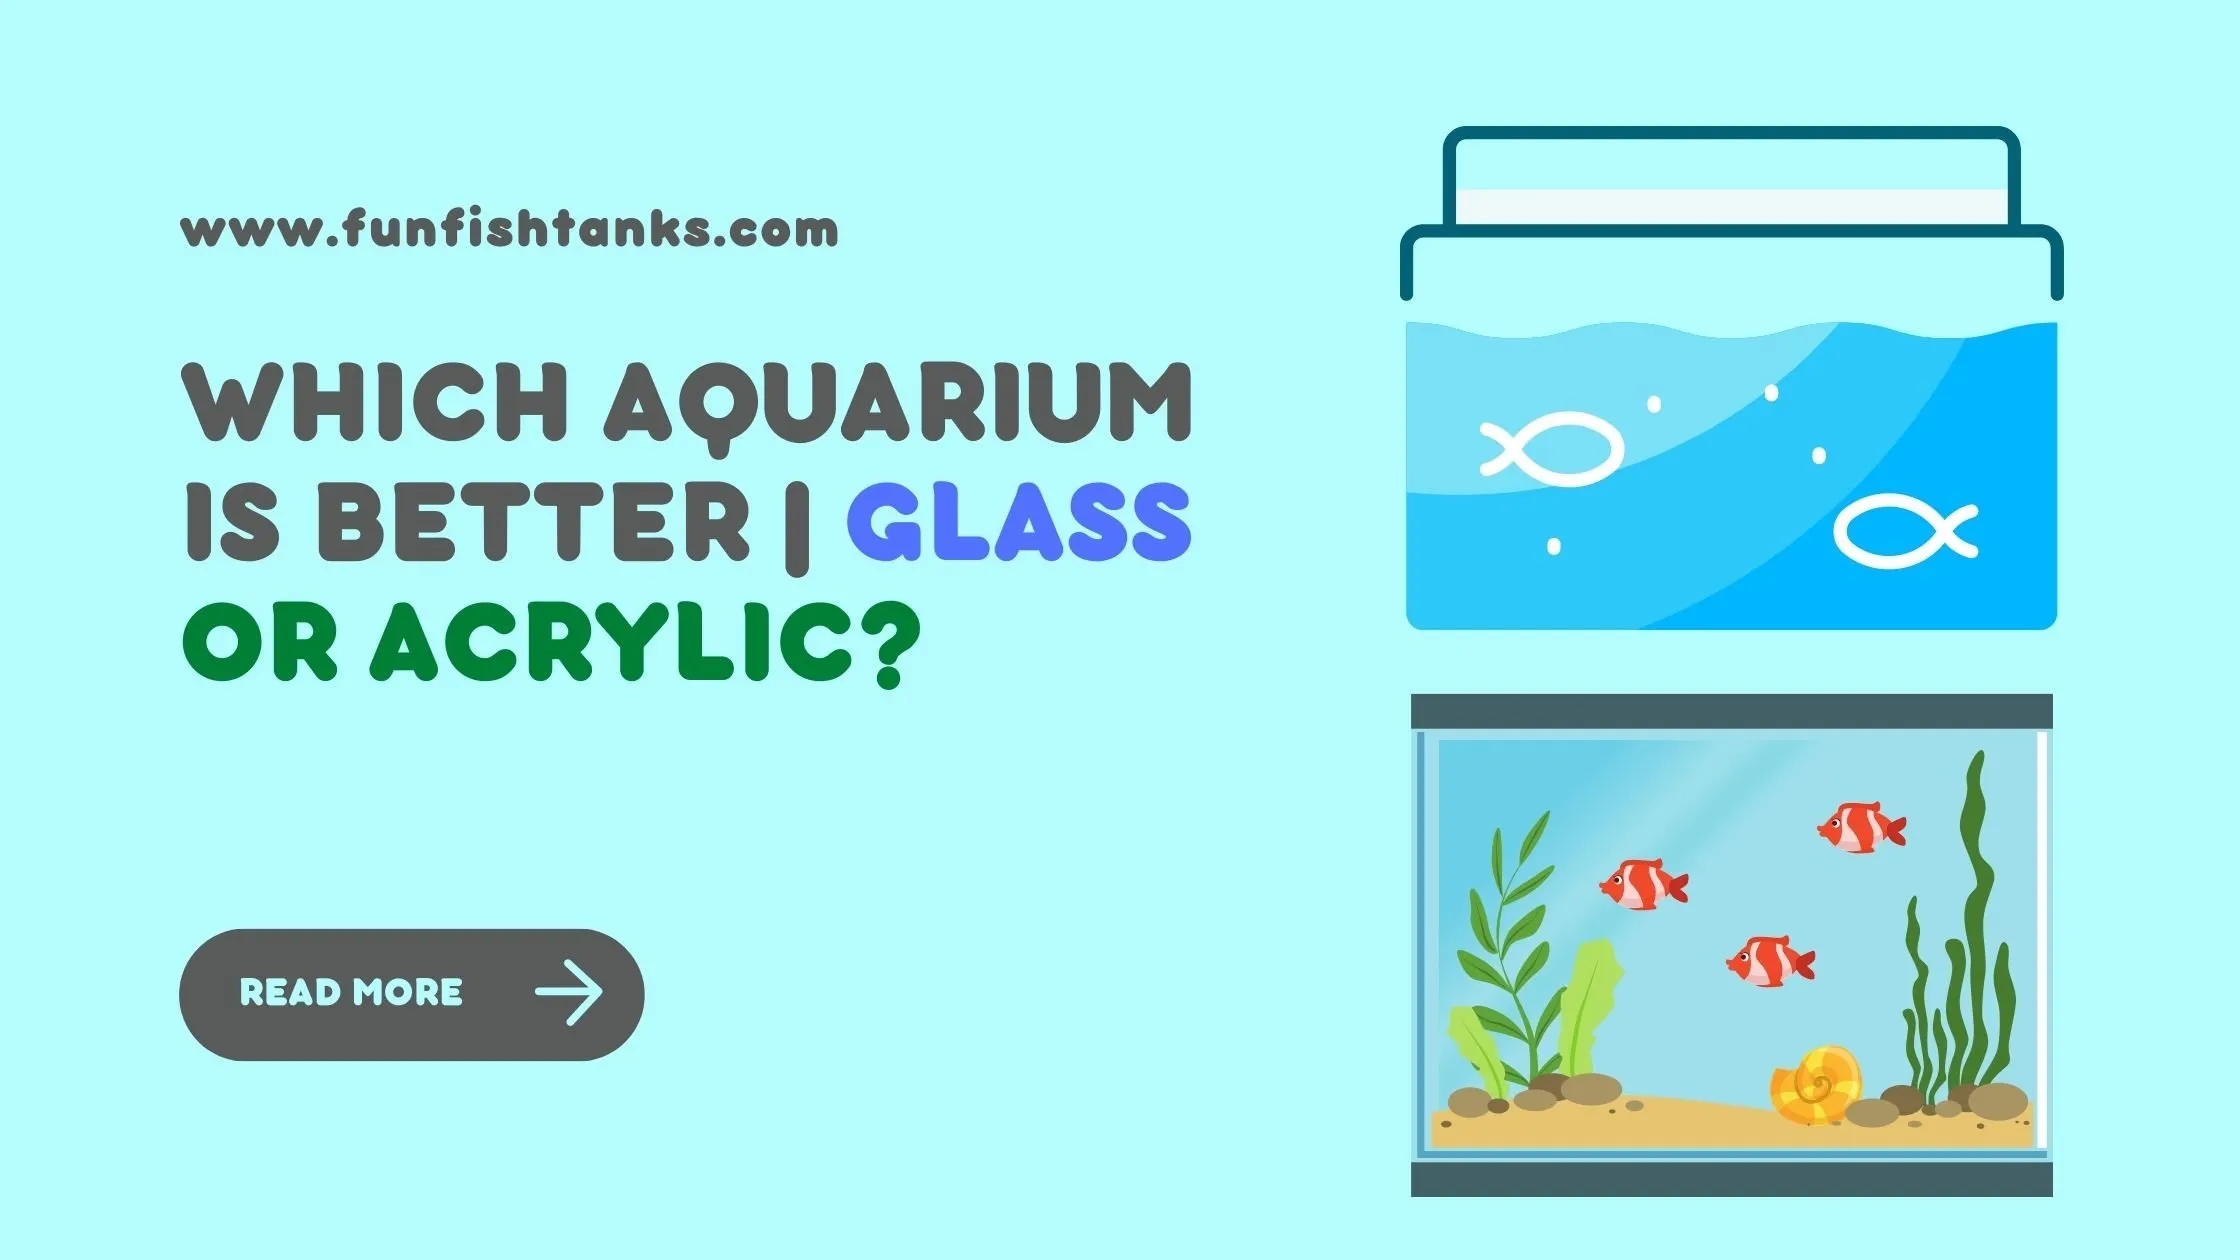 which aquarium is better Glass or Acrylic